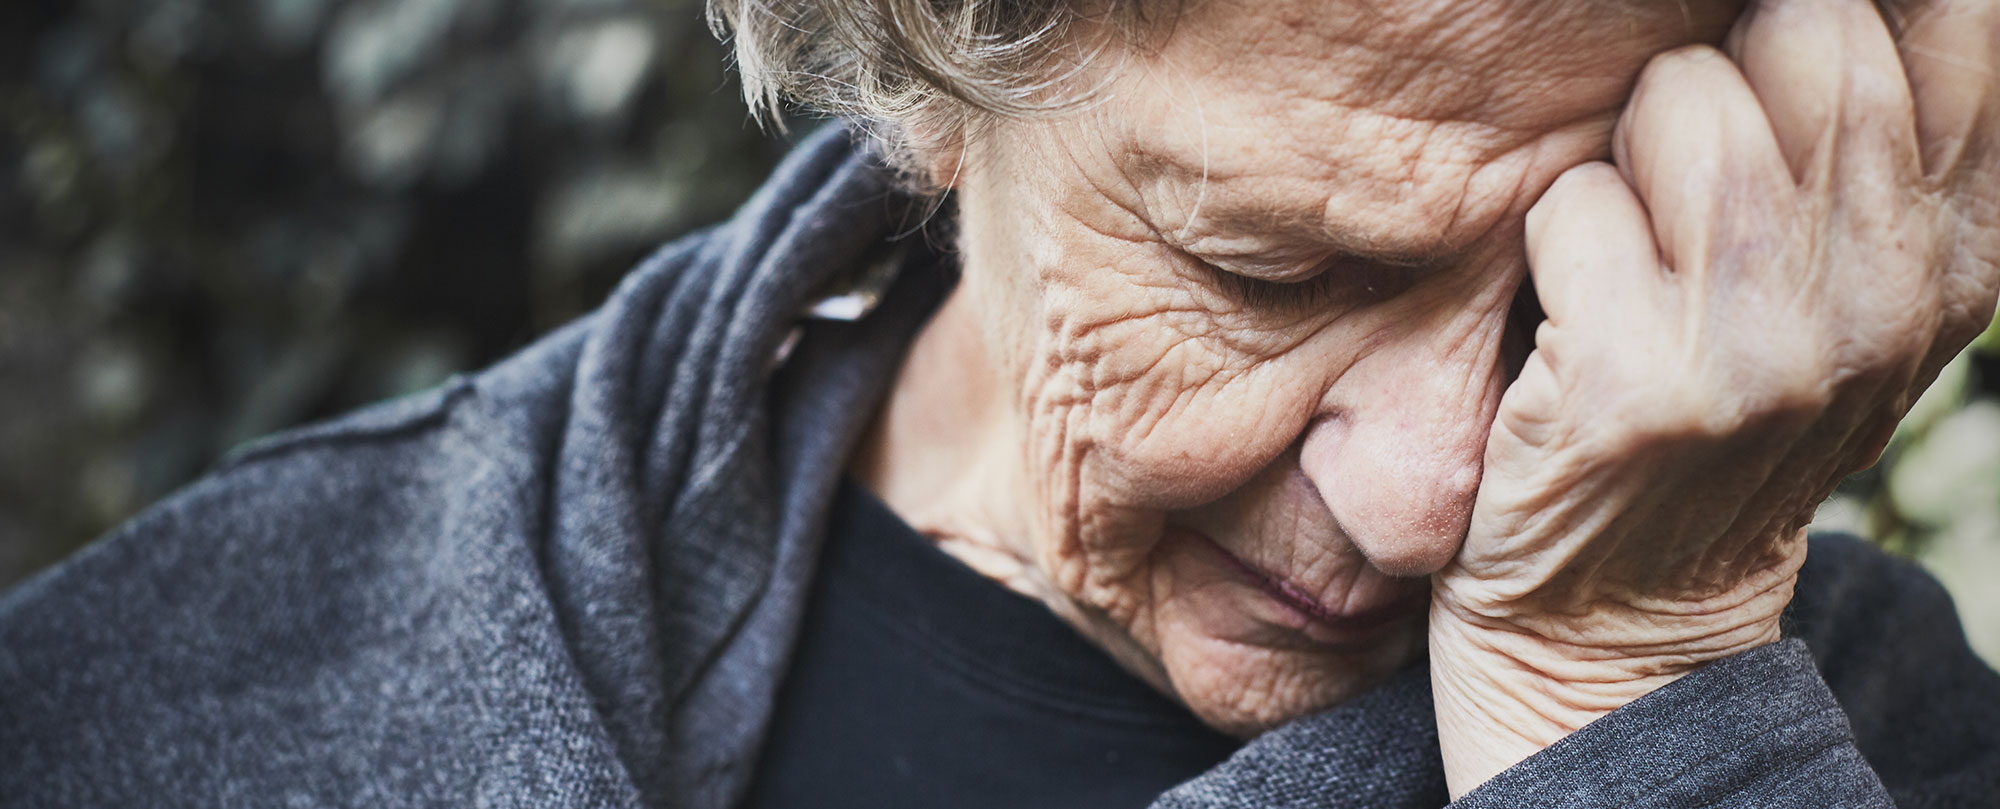 elderly woman with her face in her hands experiencing emotional discomfort